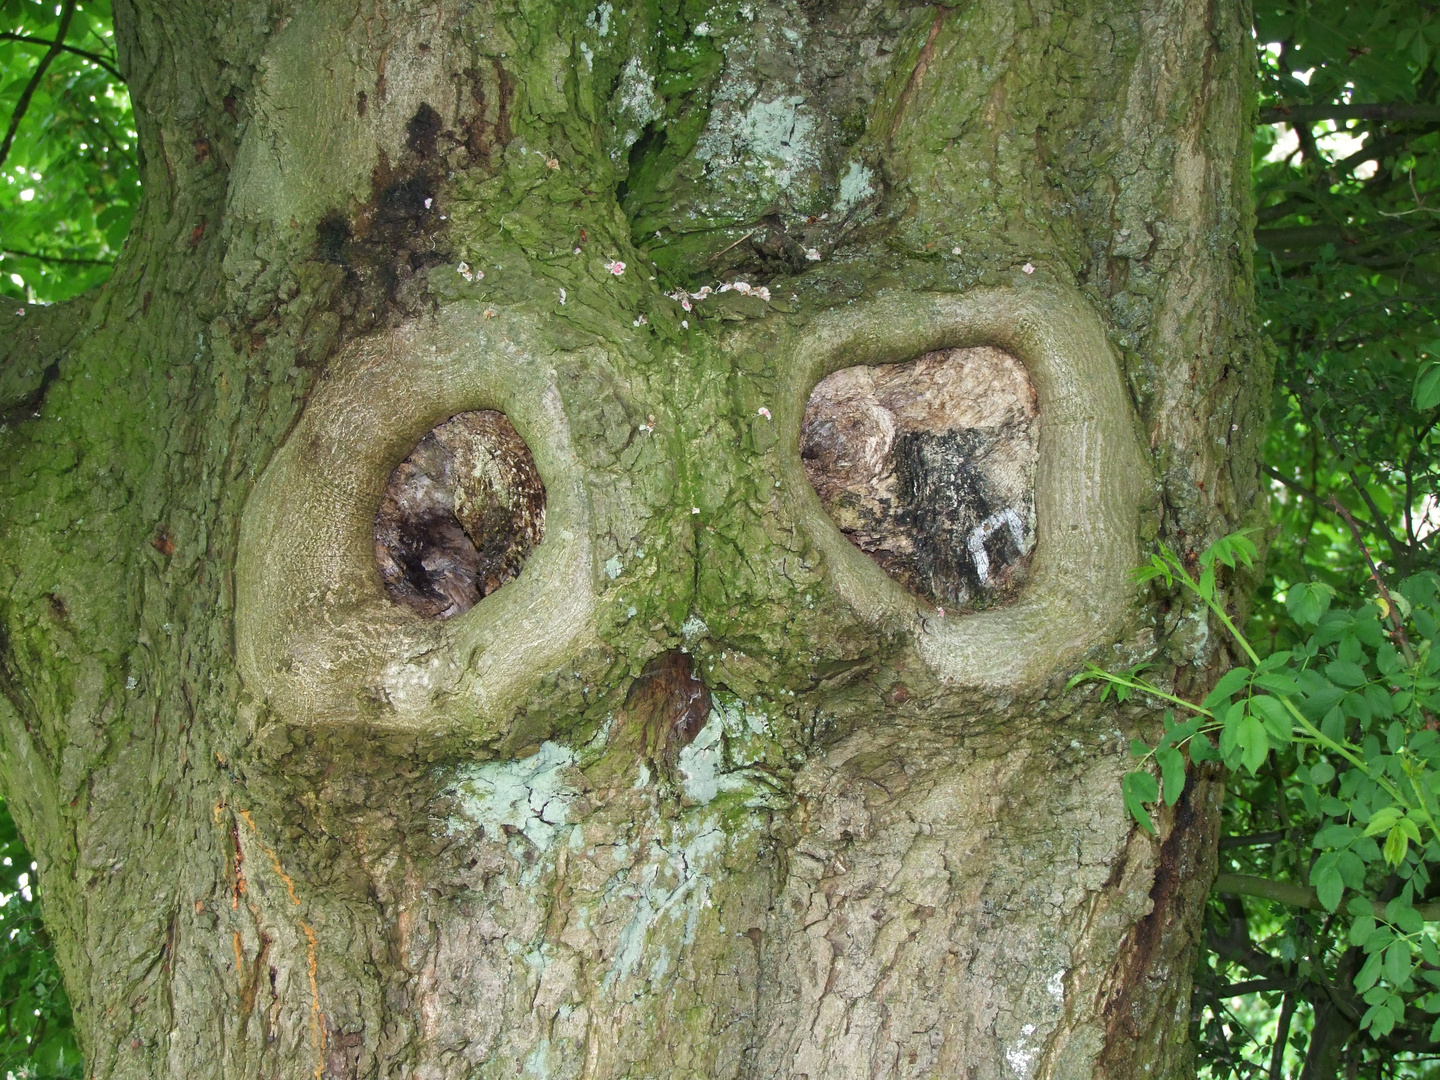 They are watching you - auch im Wald